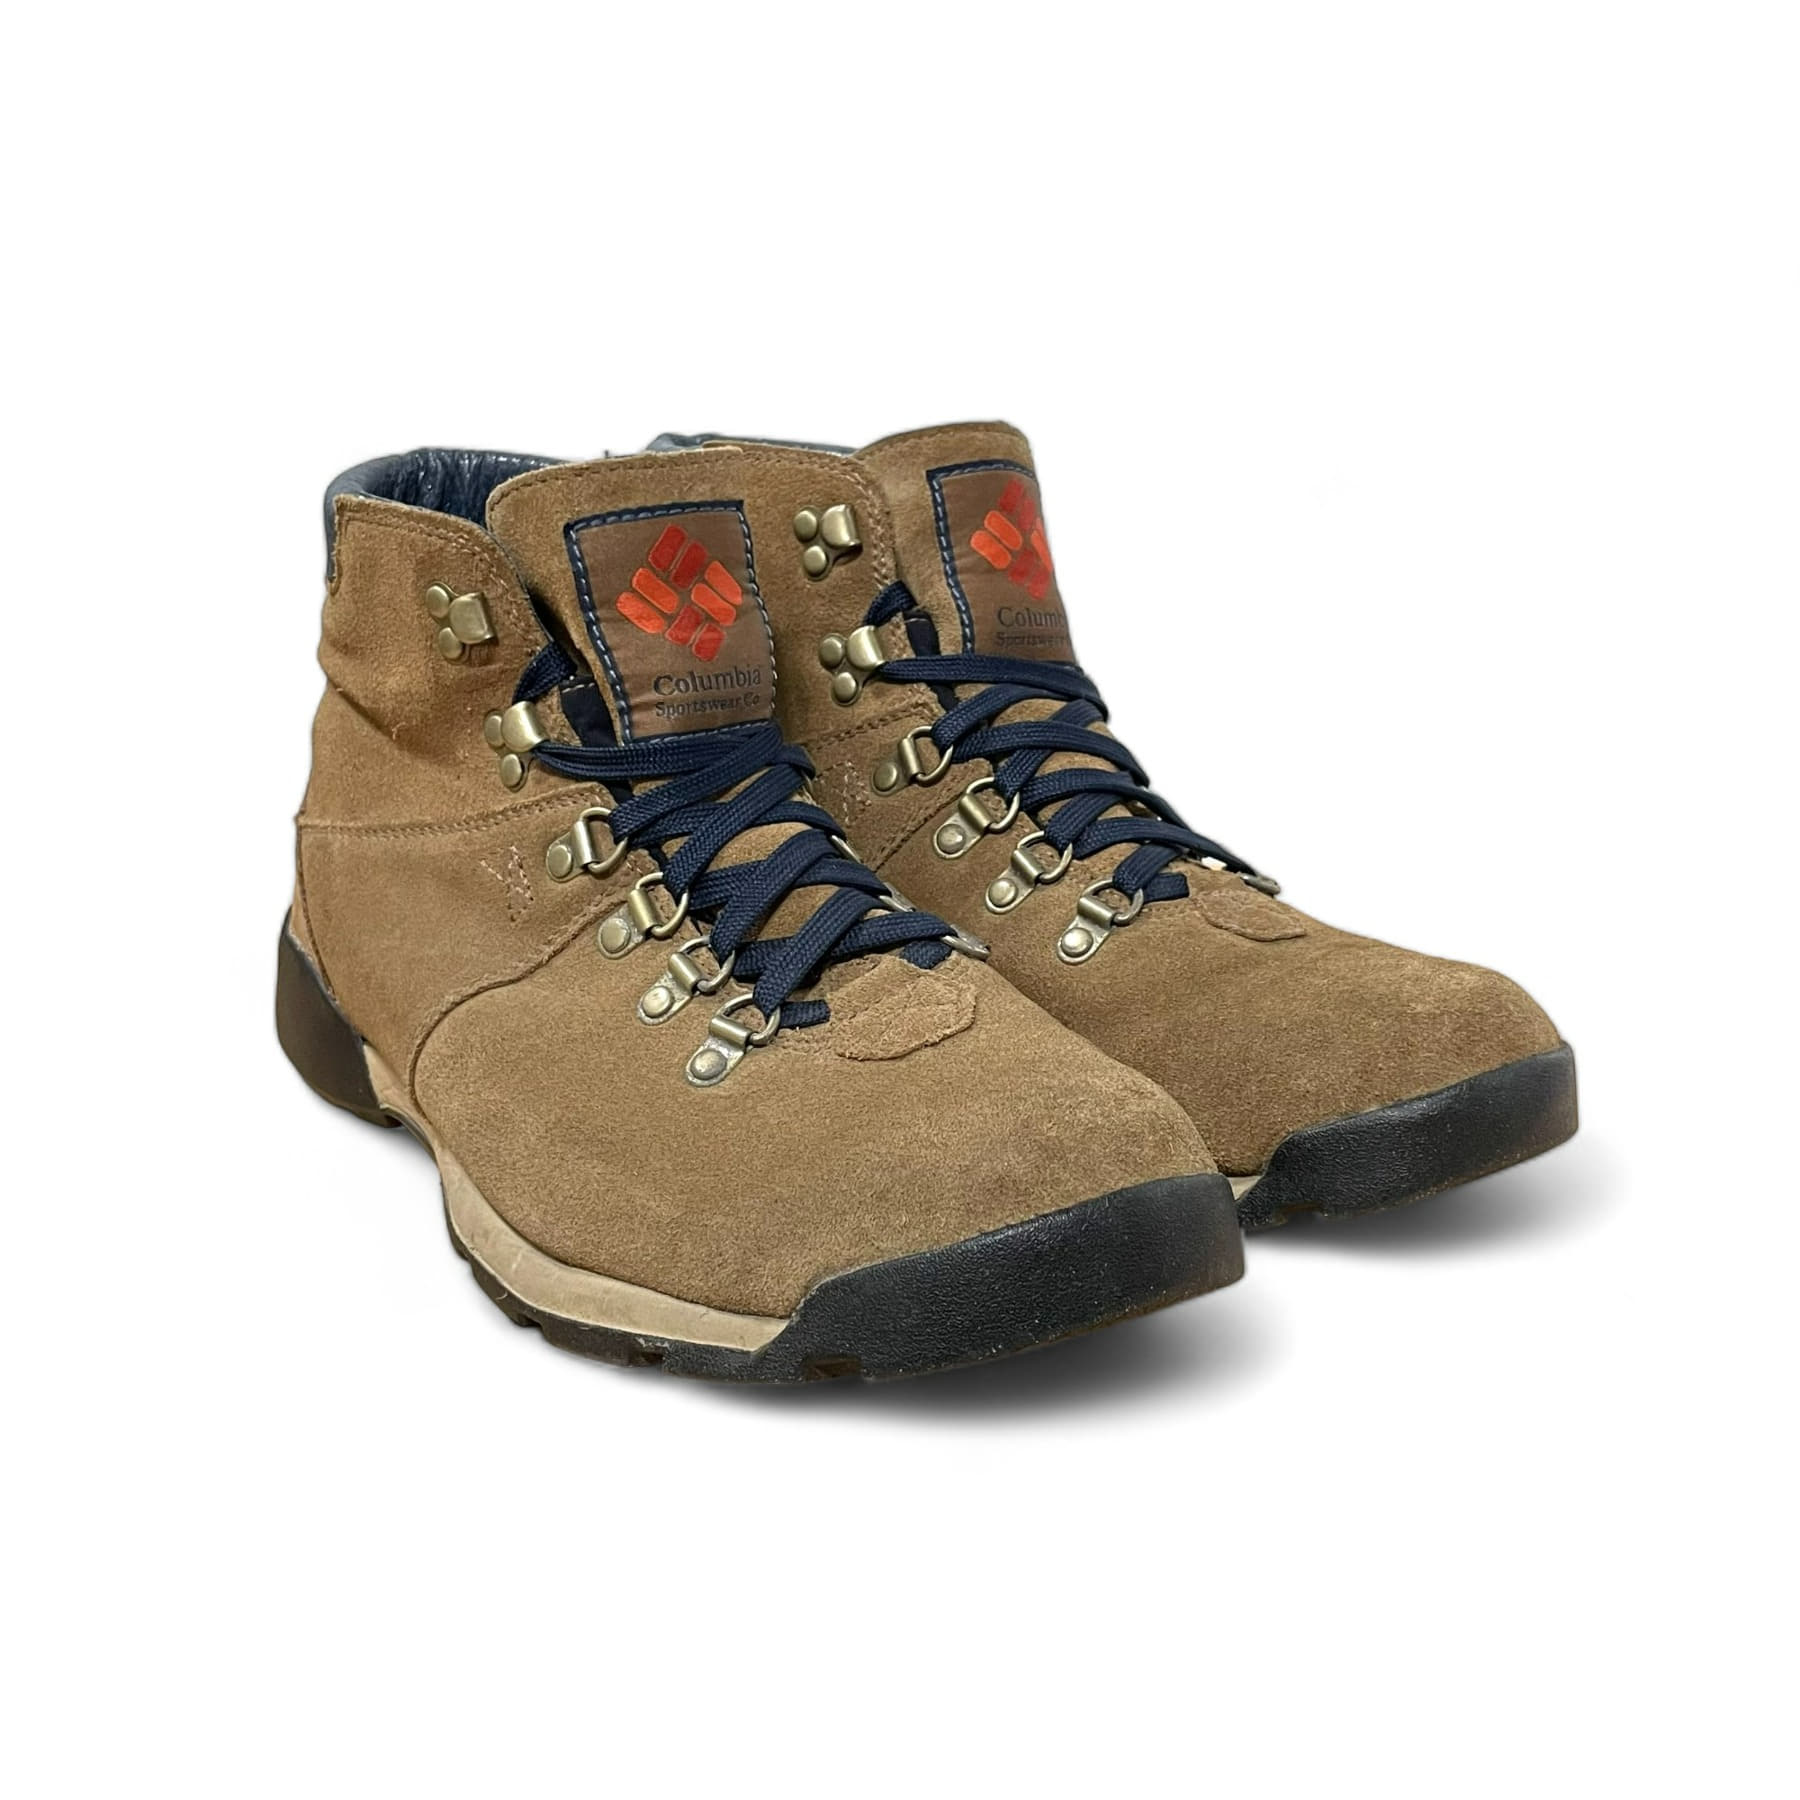 Columbia Hiking Boots - 265mm